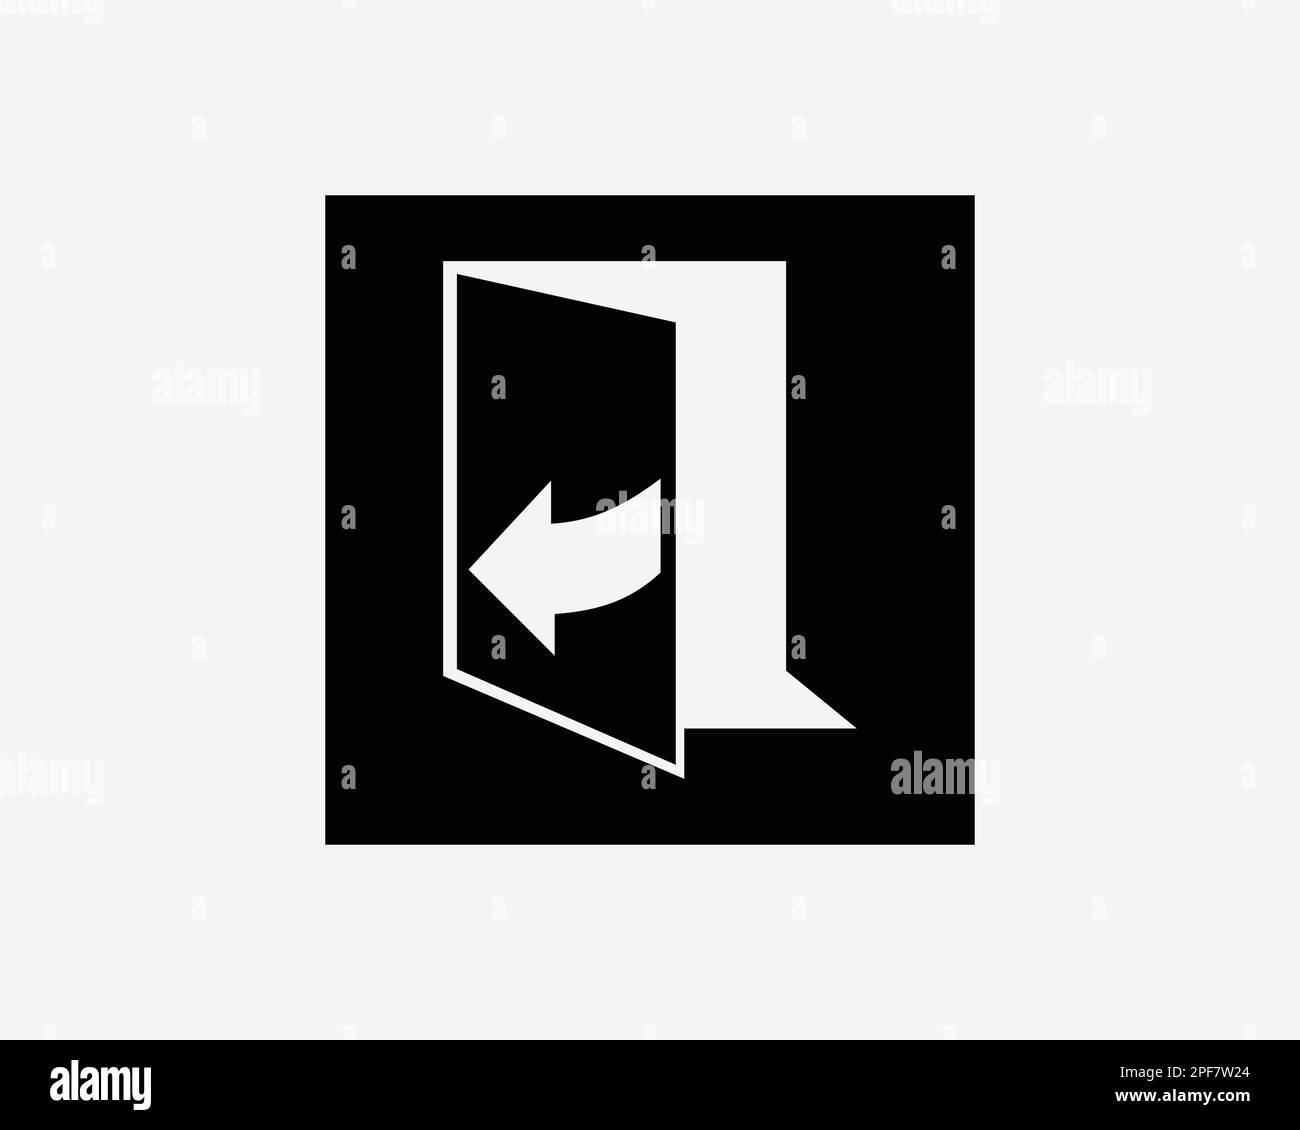 Door Pull Open Left Side Exit Entrance Path Signage Black White Silhouette Sign Symbol Icon Clipart Graphic Artwork Pictogram Illustration Vector Stock Vector